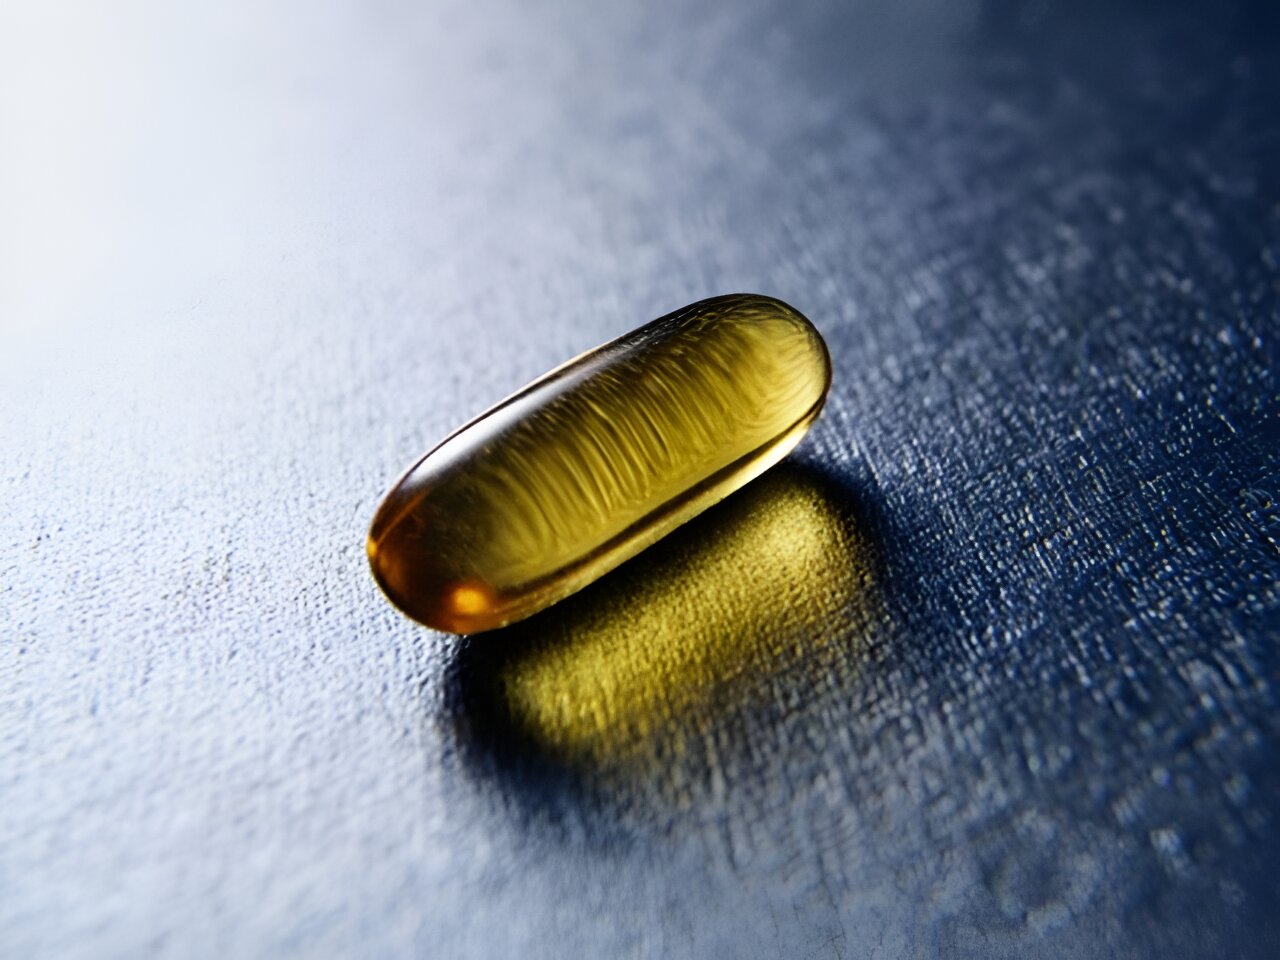 Do fish oil supplements really boost your health?